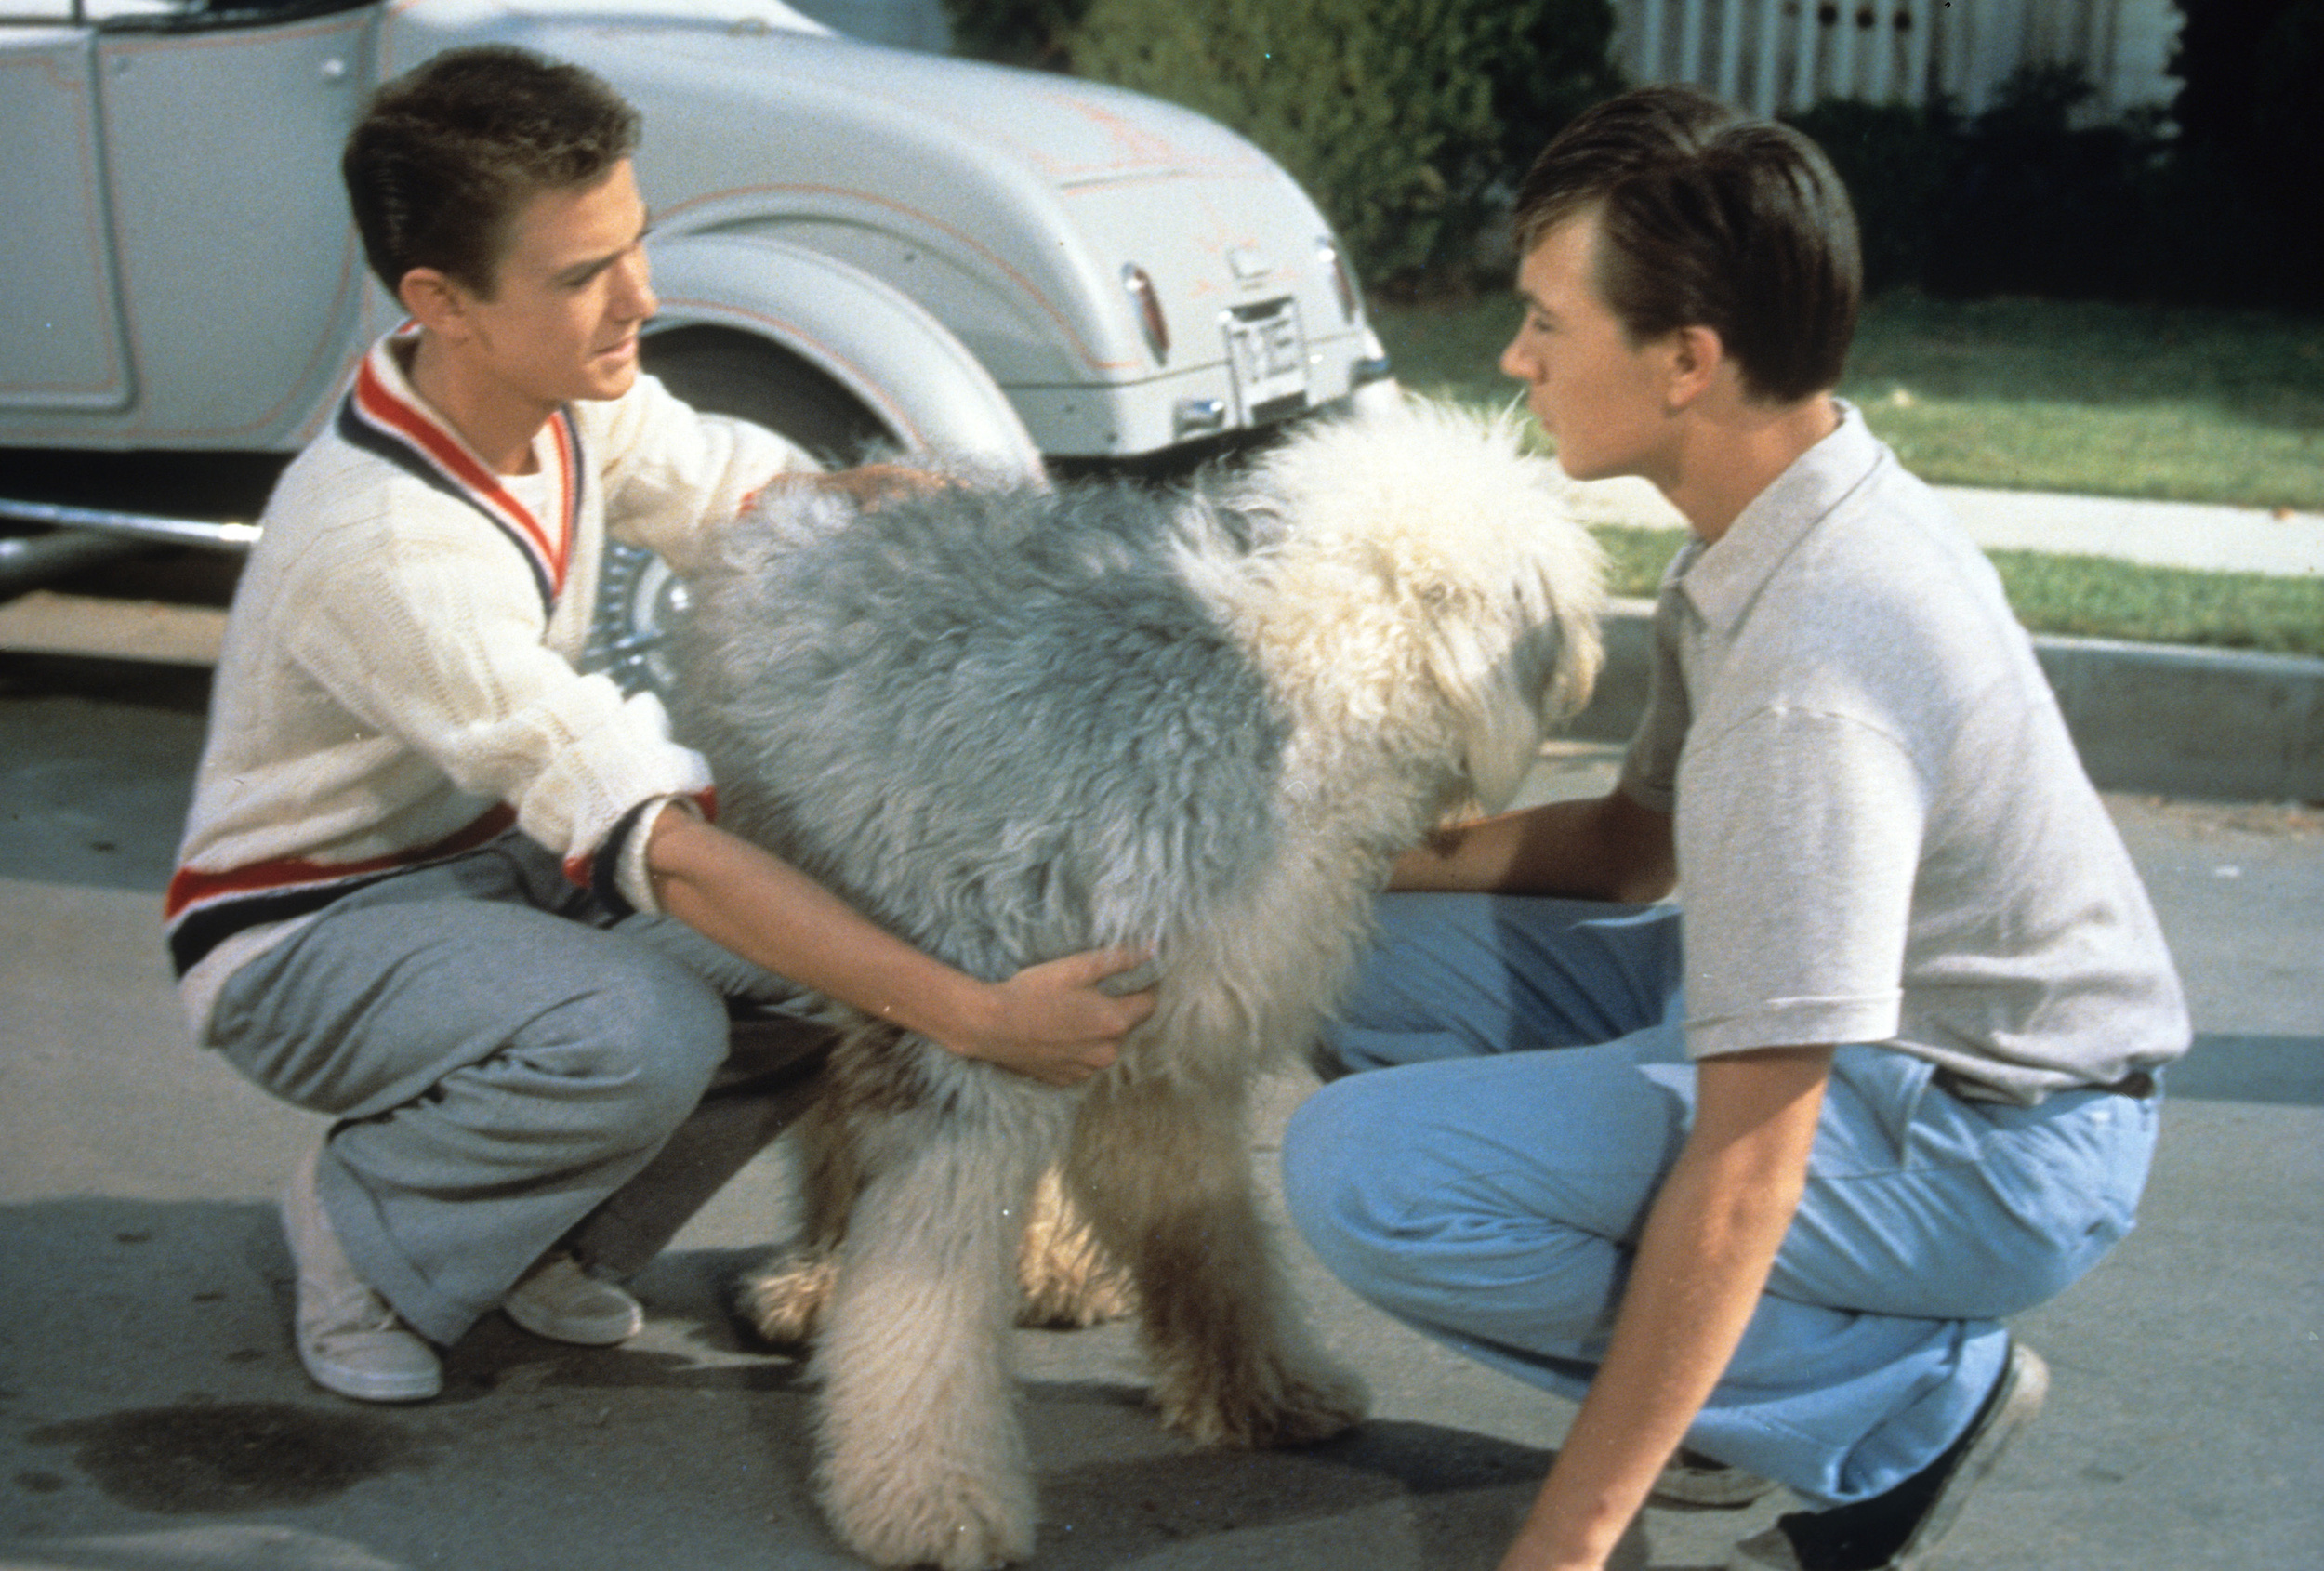 <p>“The Shaggy Dog” has been remade a few times, but we are going with the original. The story is simple. Tommy Kirk, a Disney movie staple, plays a teenage boy who periodically turns into, well, a shaggy dog. Fred MacMurray, also a Disney staple, is around as well. Amazingly, this movie got a sequel called “The Shaggy D.A.” Yes, it’s about an attorney who turns into a dog.</p><p><a href='https://www.msn.com/en-us/community/channel/vid-cj9pqbr0vn9in2b6ddcd8sfgpfq6x6utp44fssrv6mc2gtybw0us'>Follow us on MSN to see more of our exclusive entertainment content.</a></p>